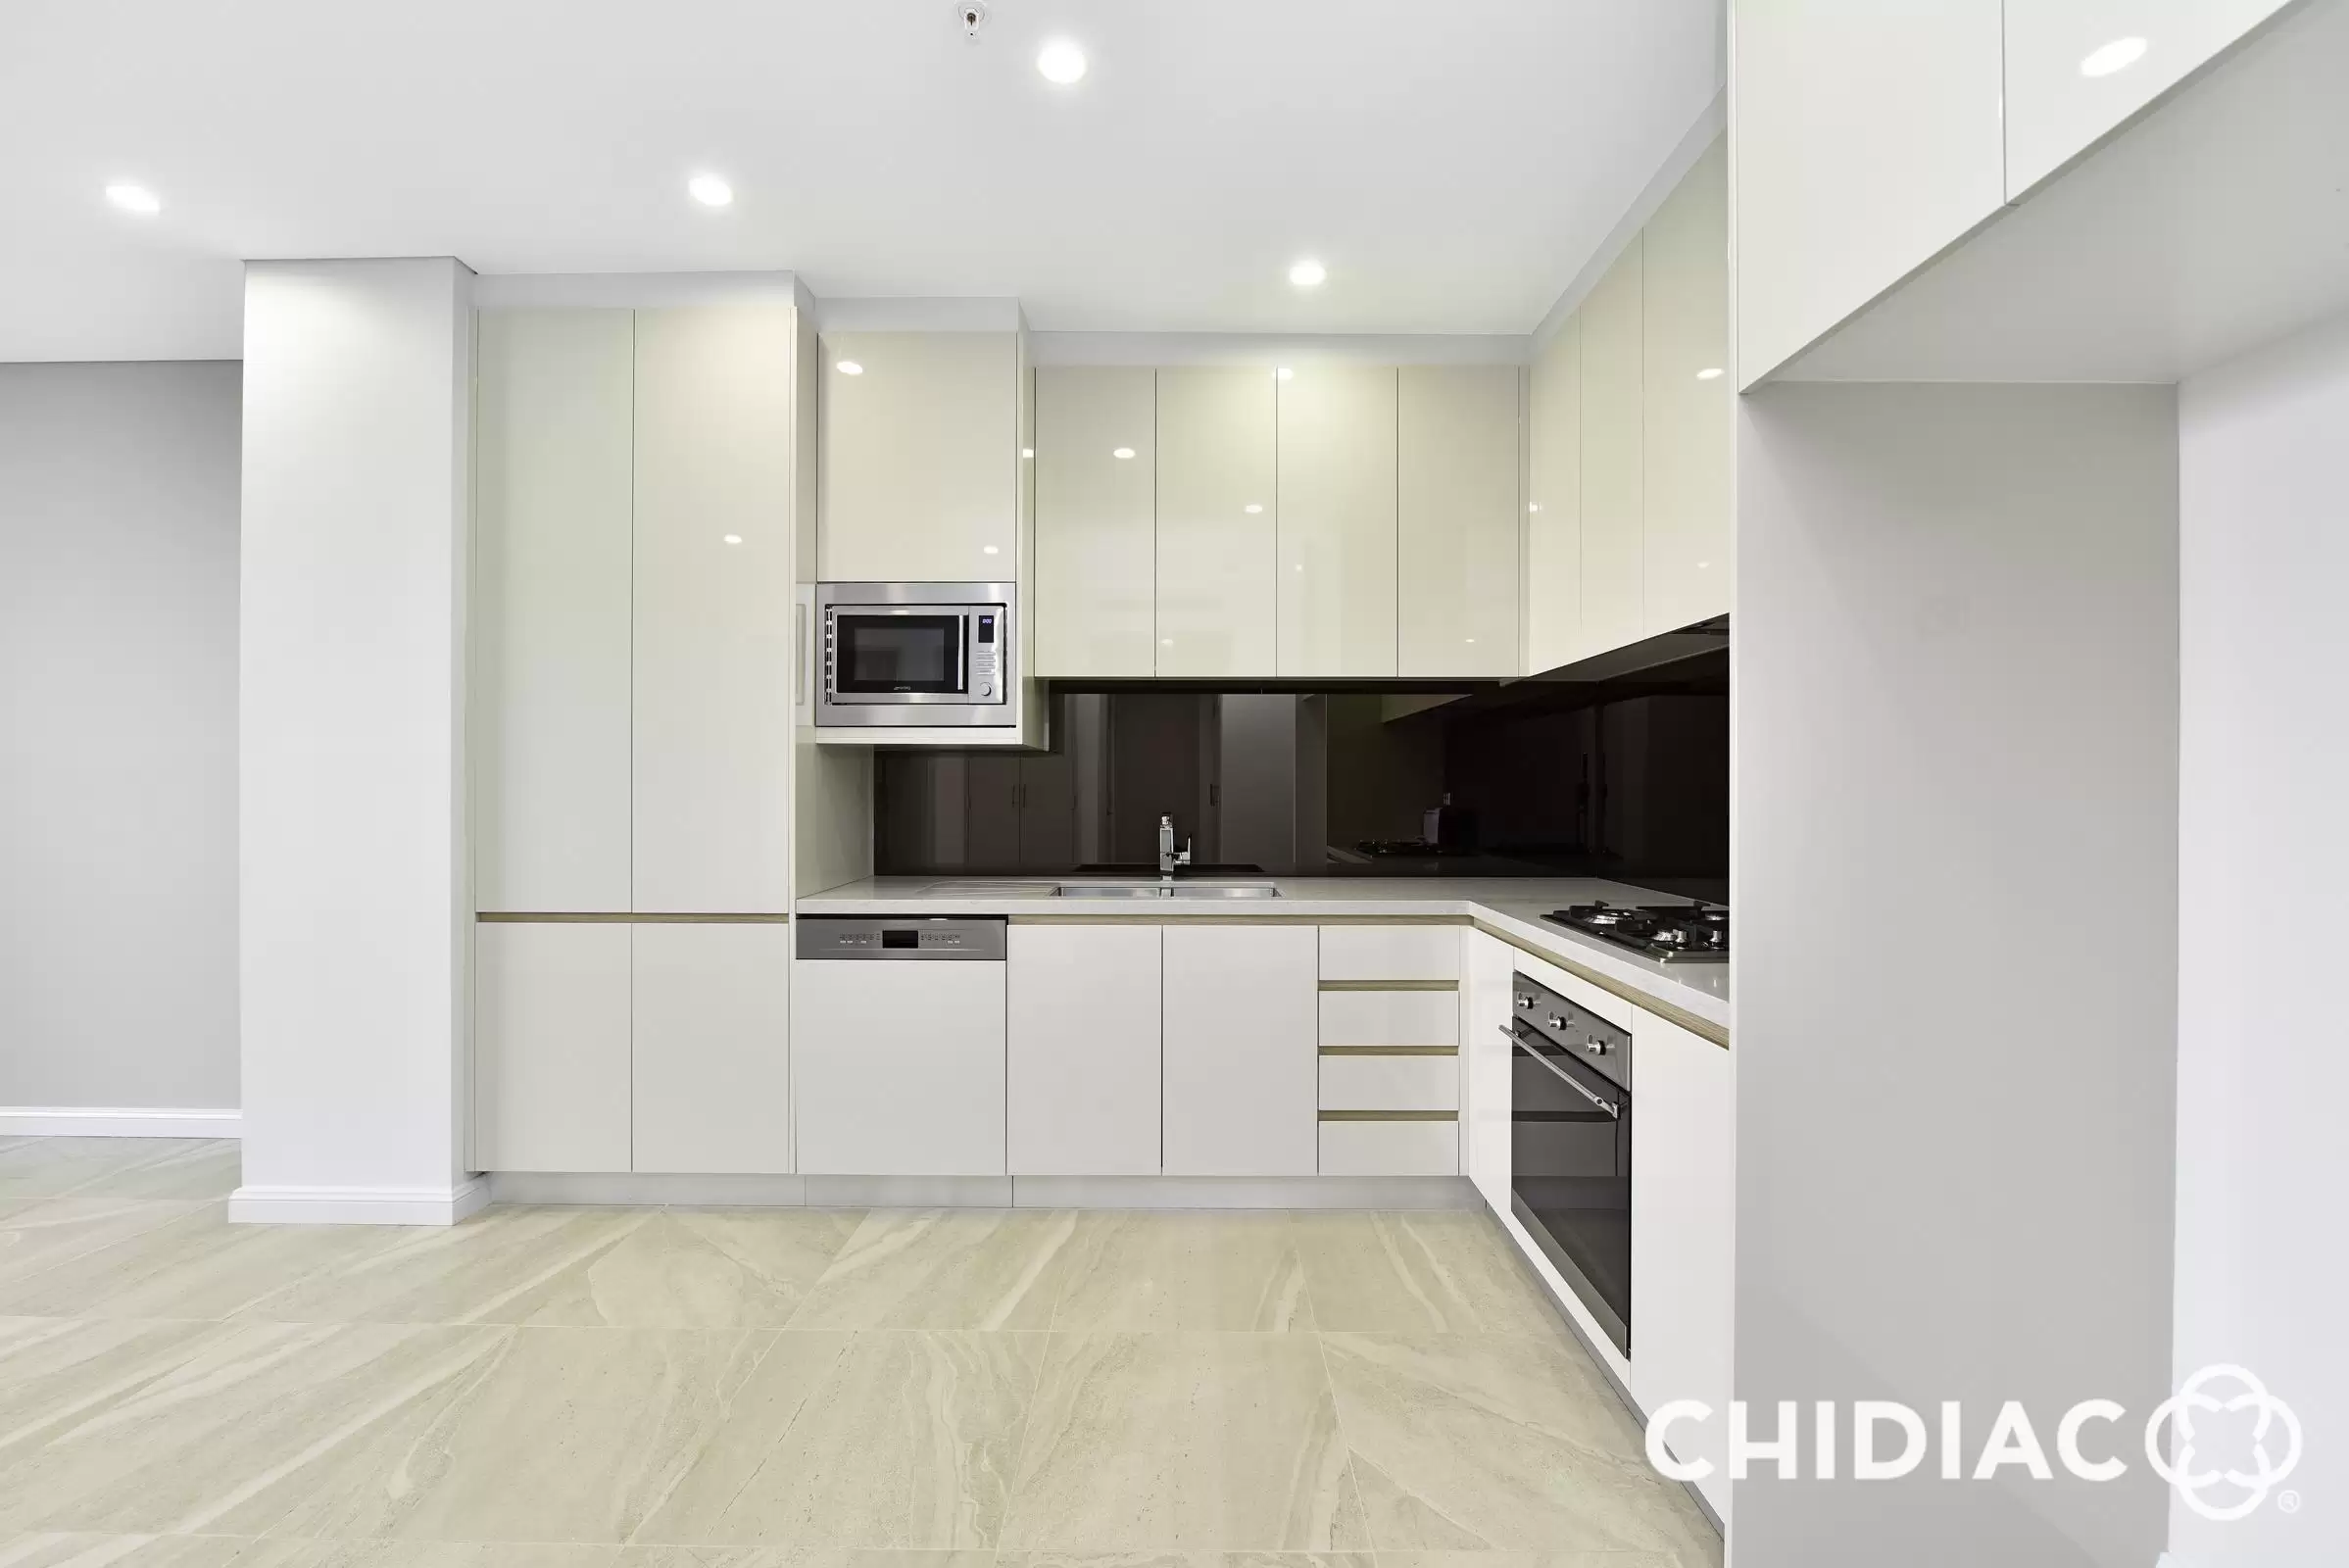 1068/9 Grazier Street, Lidcombe Leased by Chidiac Realty - image 2